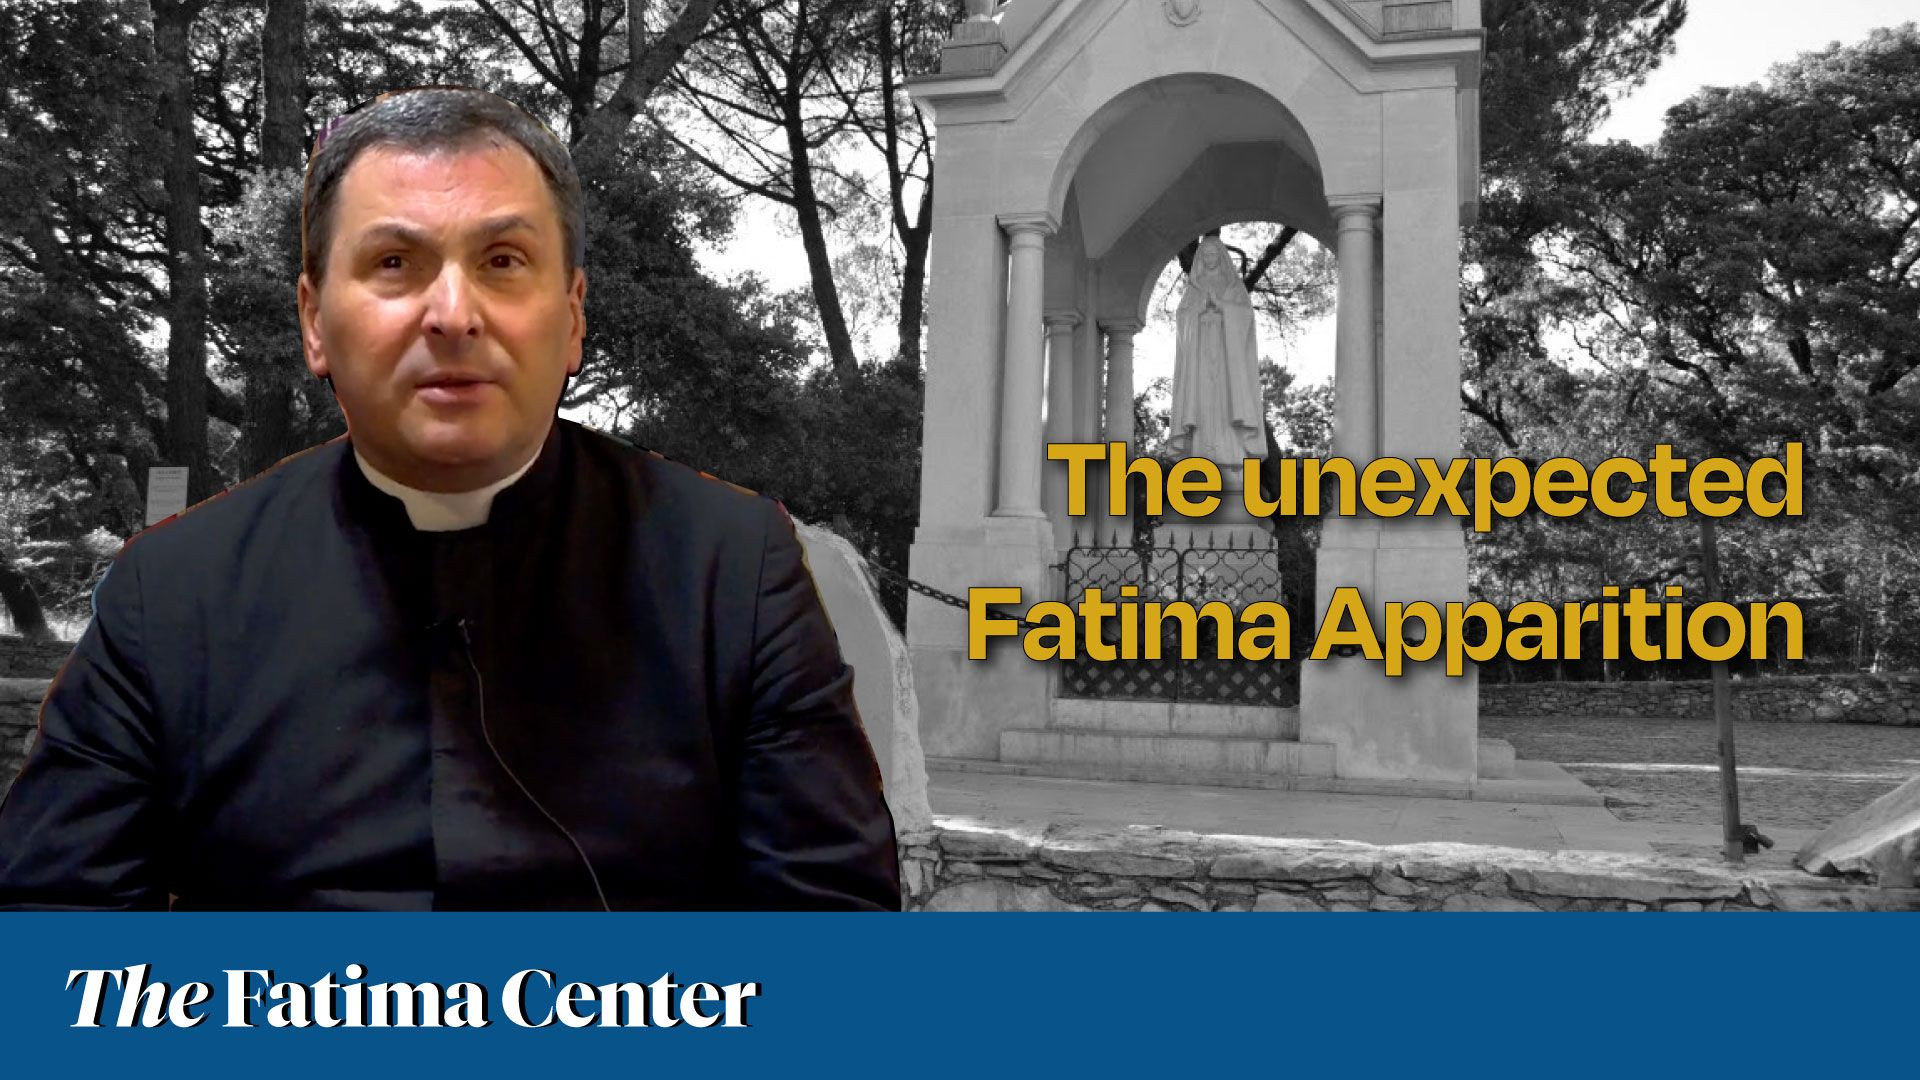 August 19th: Unexpected Fatima Apparition | Living the Fatima Message